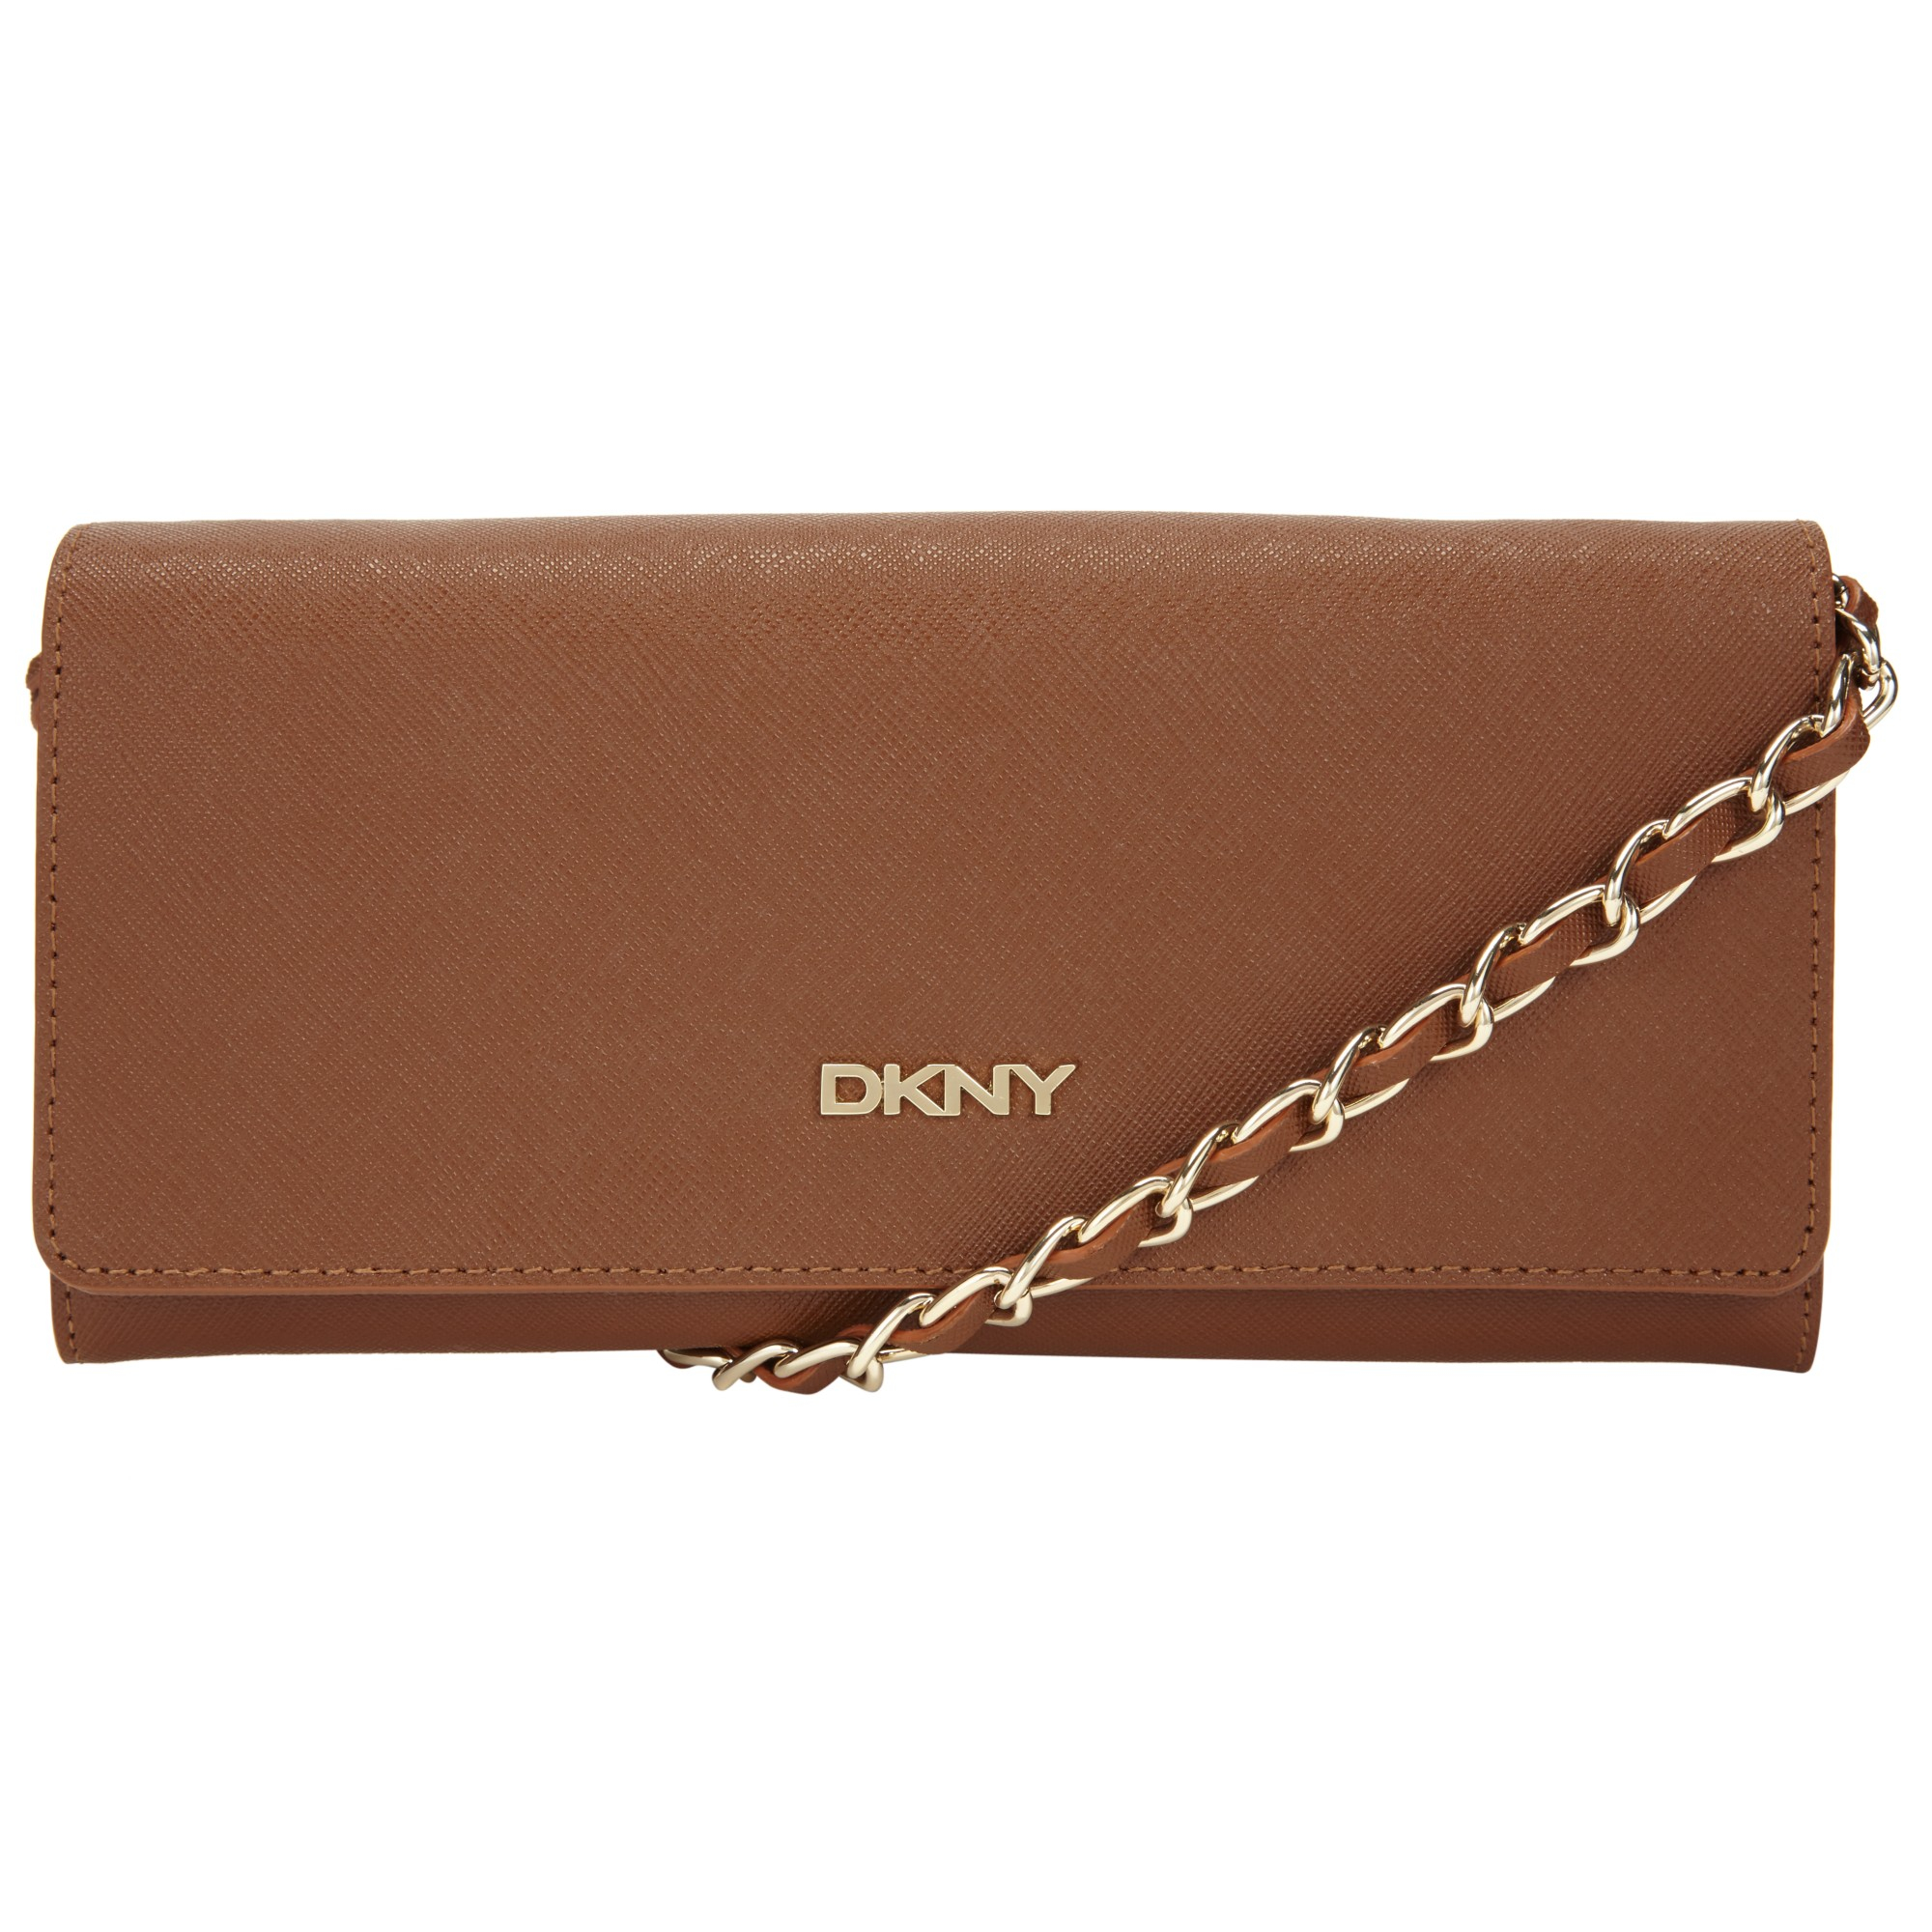 Dkny Bryant Park Saffiano Leather Clutch Bag in Brown | Lyst